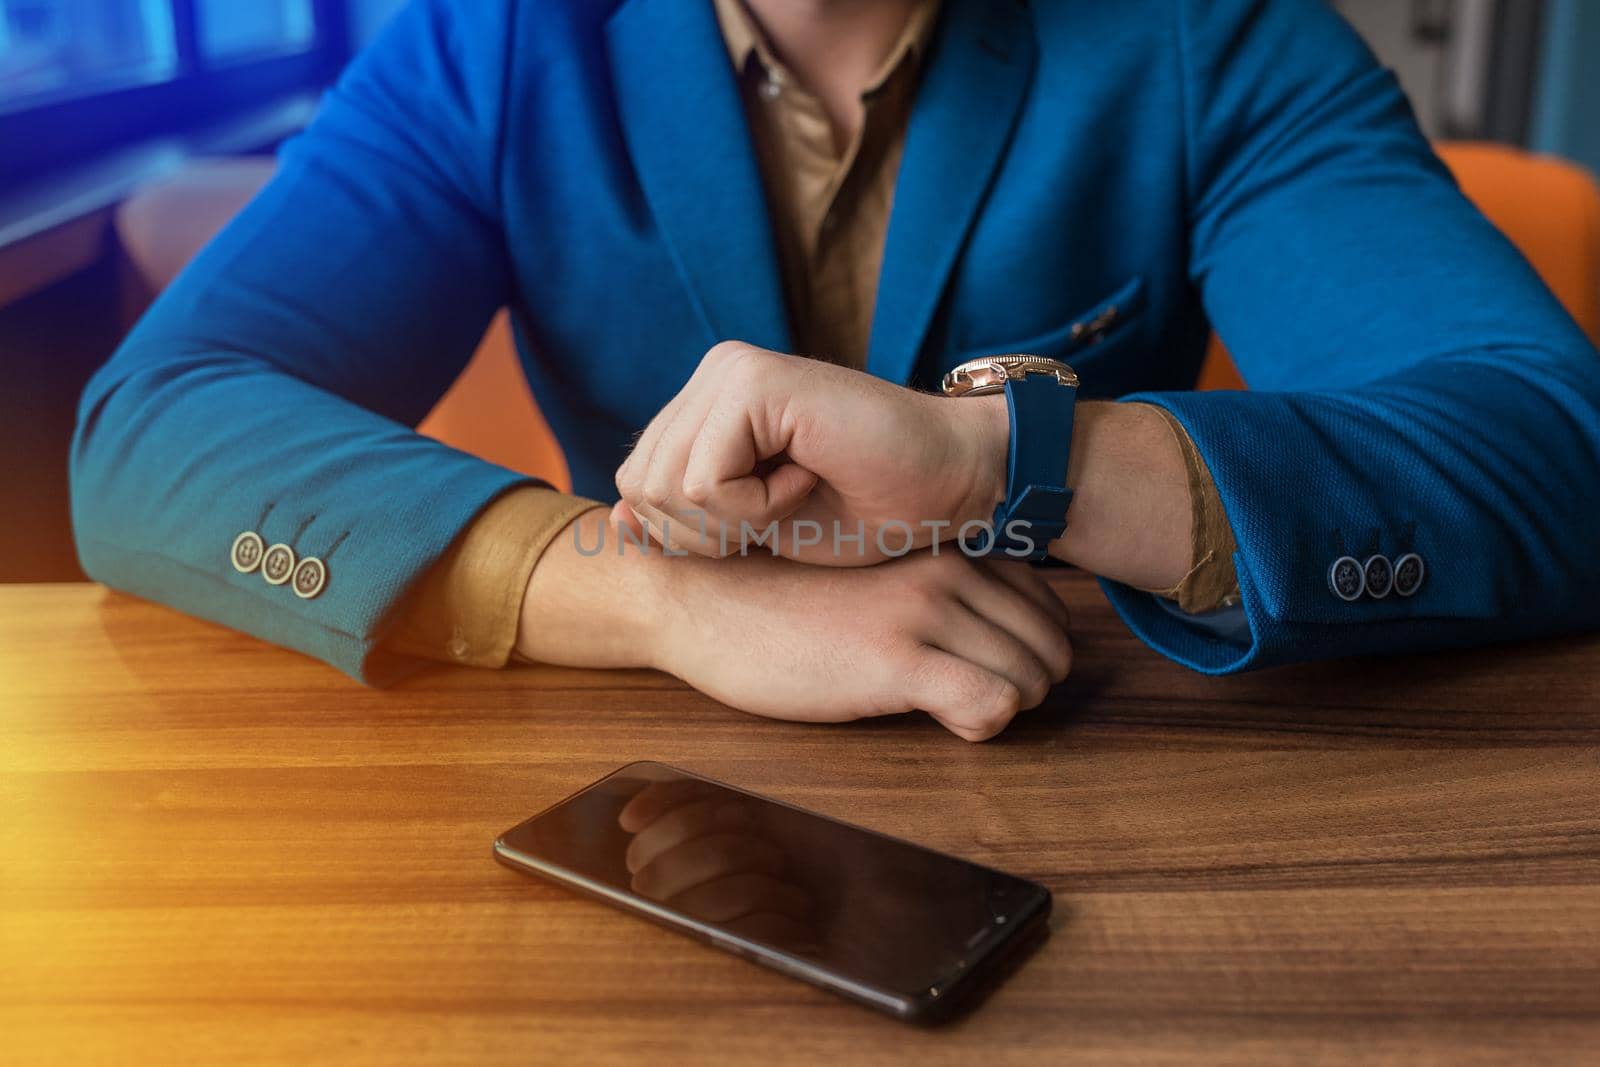 A businessman in a blue jacket looks at the time on a hand watch, opposite lies on a wooden table of a mobile phone or smartphone.